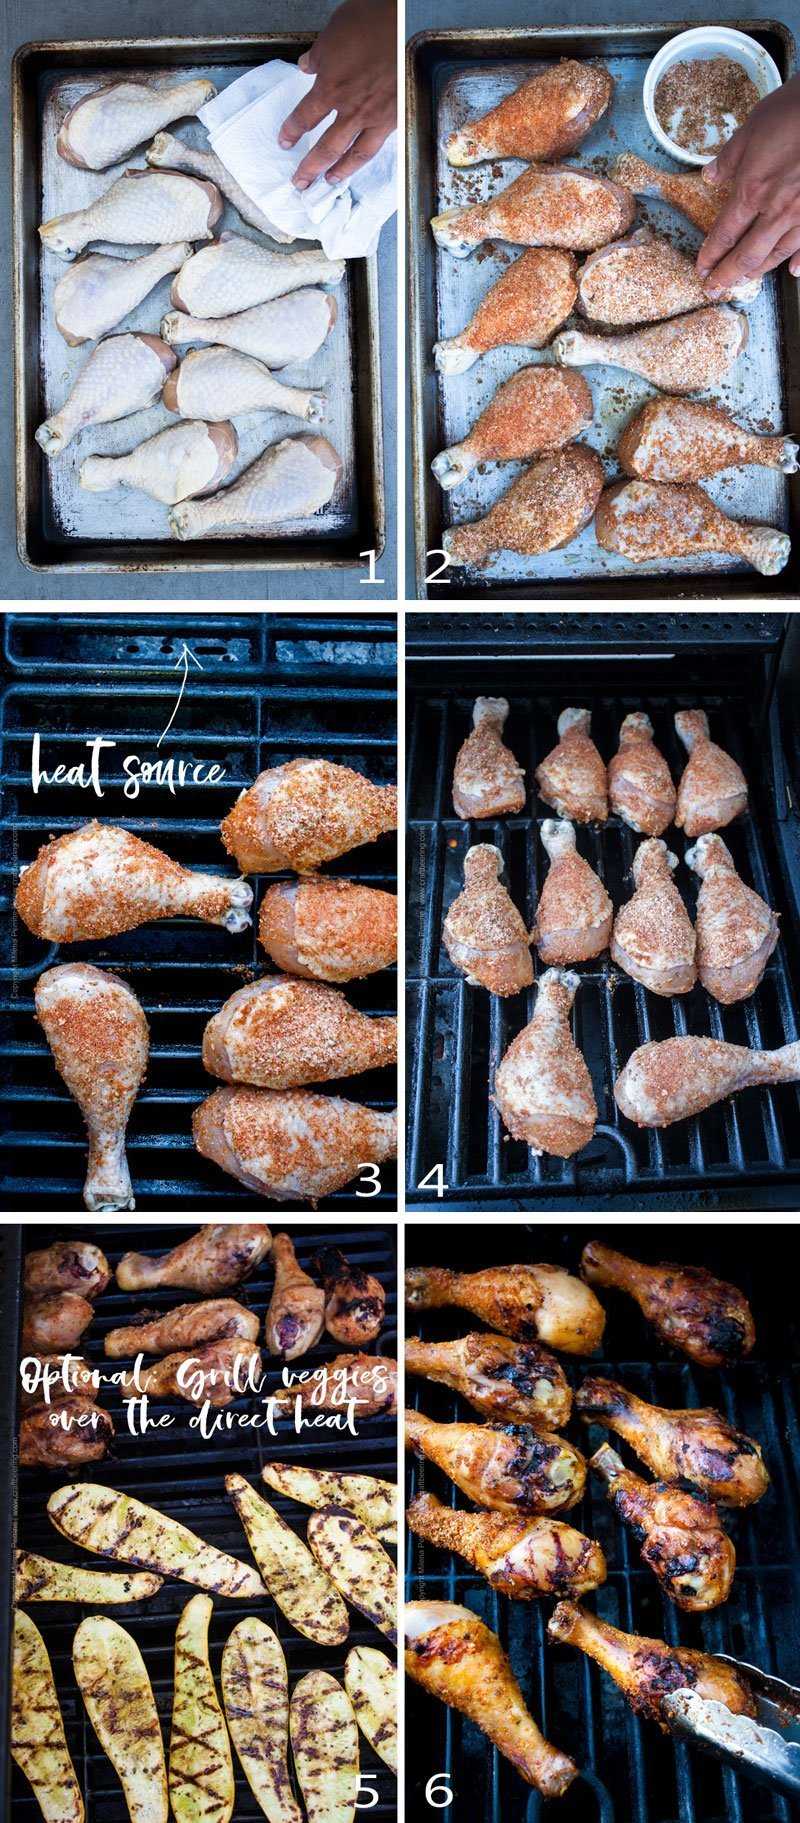 Step by step image grid showing how to grill chicken drumsticks over indirect heat.